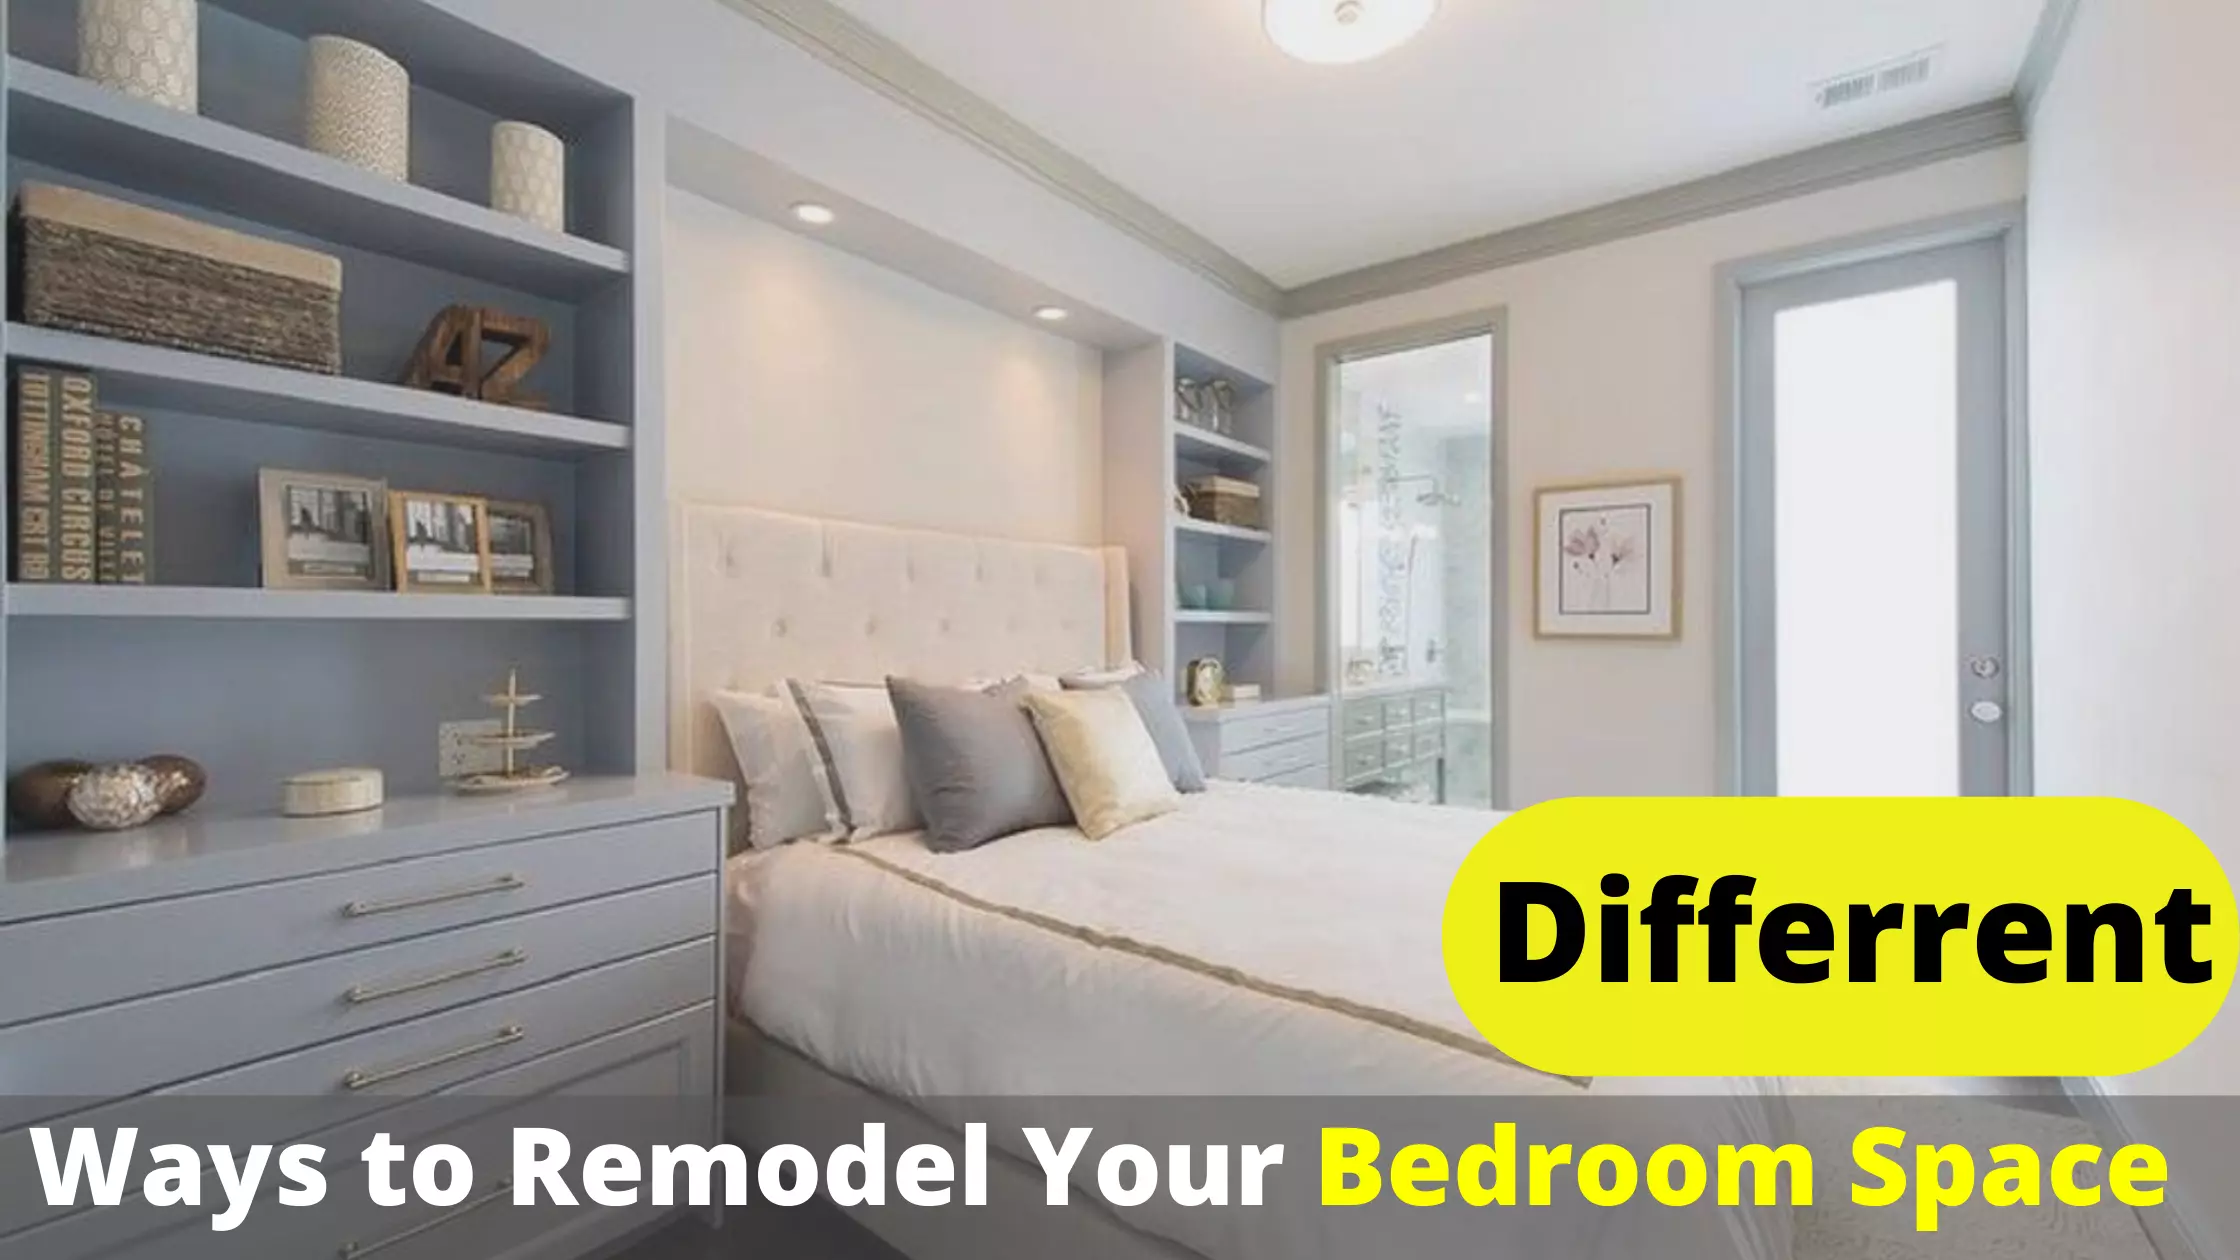 5 Different Ways to Remodel Your Bedroom Space